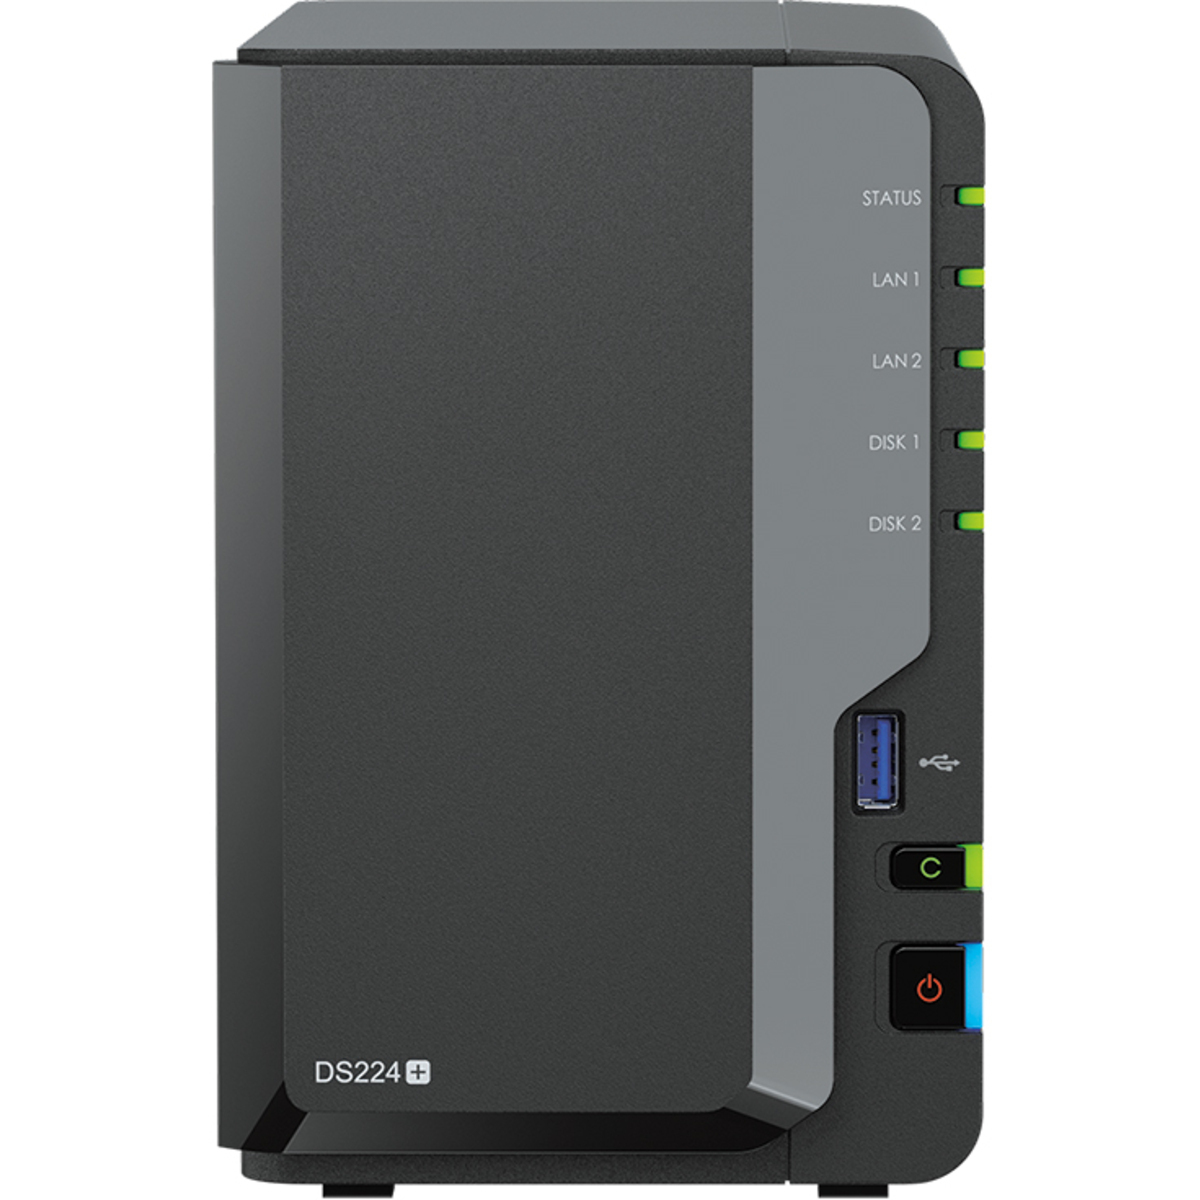 Synology DiskStation DS224+ 8tb 2-Bay Desktop Personal / Basic Home / Small Office NAS - Network Attached Storage Device 1x8tb Seagate IronWolf Pro ST8000NT001 3.5 7200rpm SATA 6Gb/s HDD NAS Class Drives Installed - Burn-In Tested - ON SALE - FREE RAM UPGRADE DiskStation DS224+